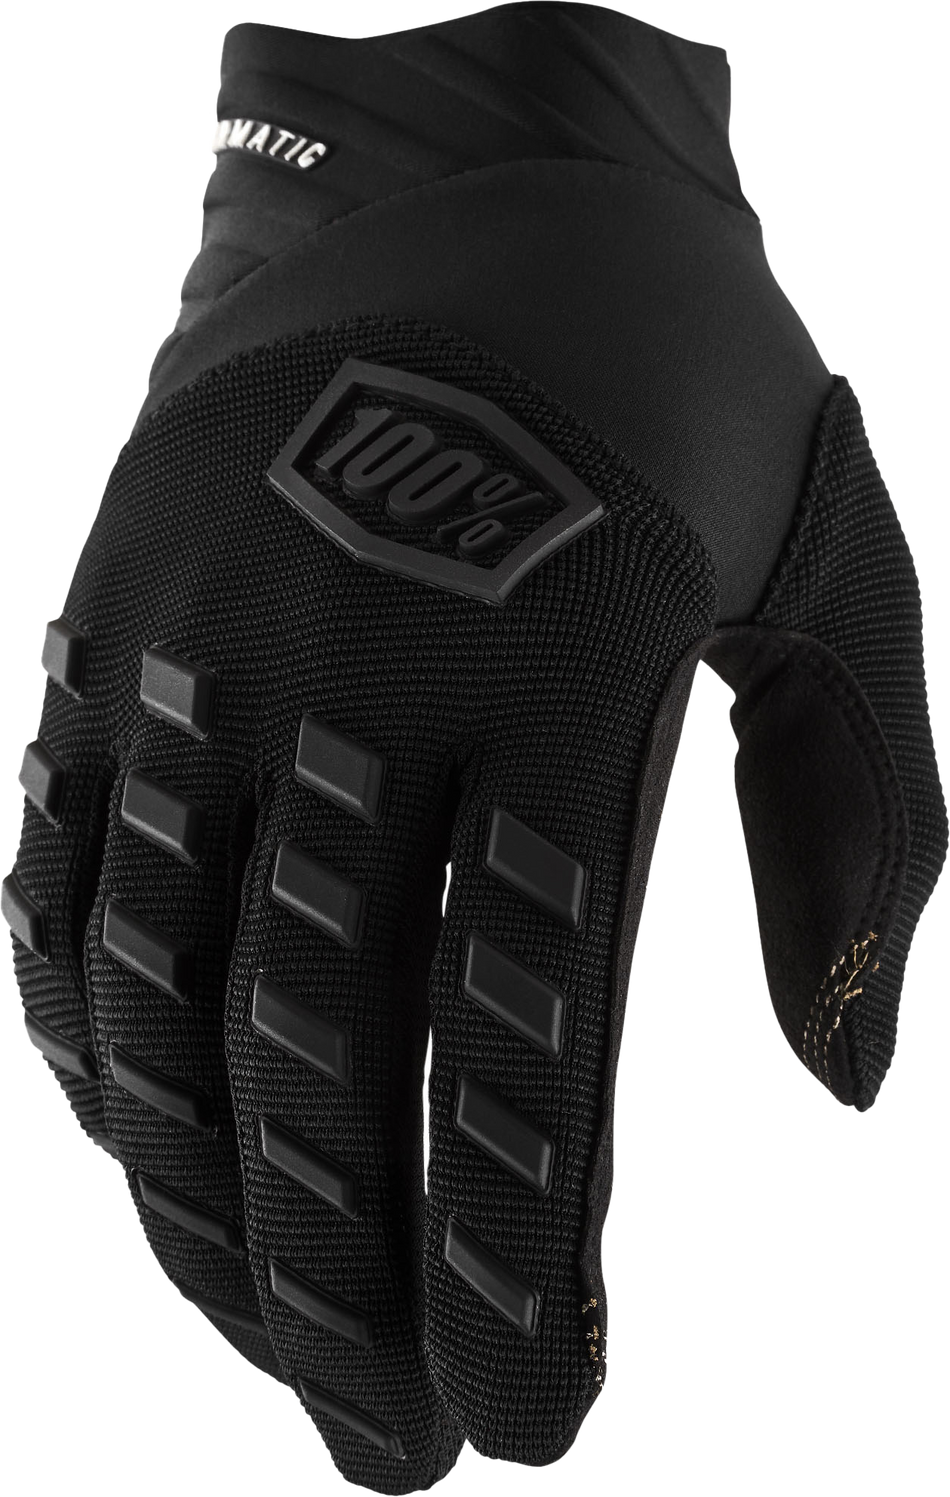 100% Airmatic Youth Gloves Black/Charcoal Md 10001-00001